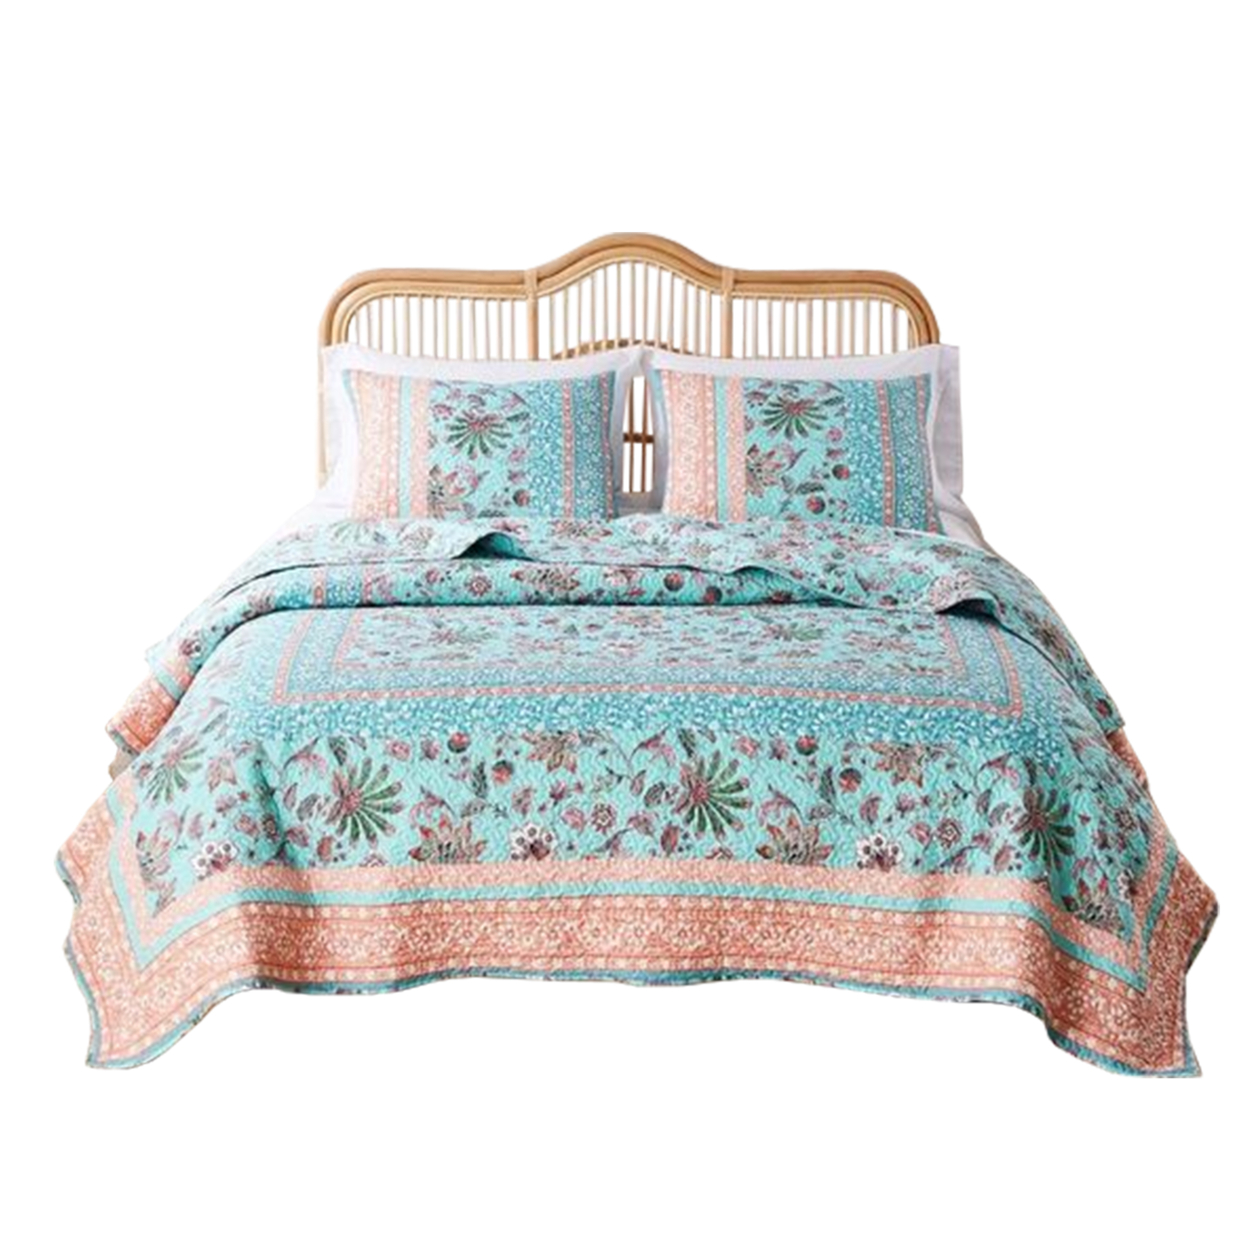 2 Piece Twin Quilt Set With Floral Print, Blue And White- Saltoro Sherpi